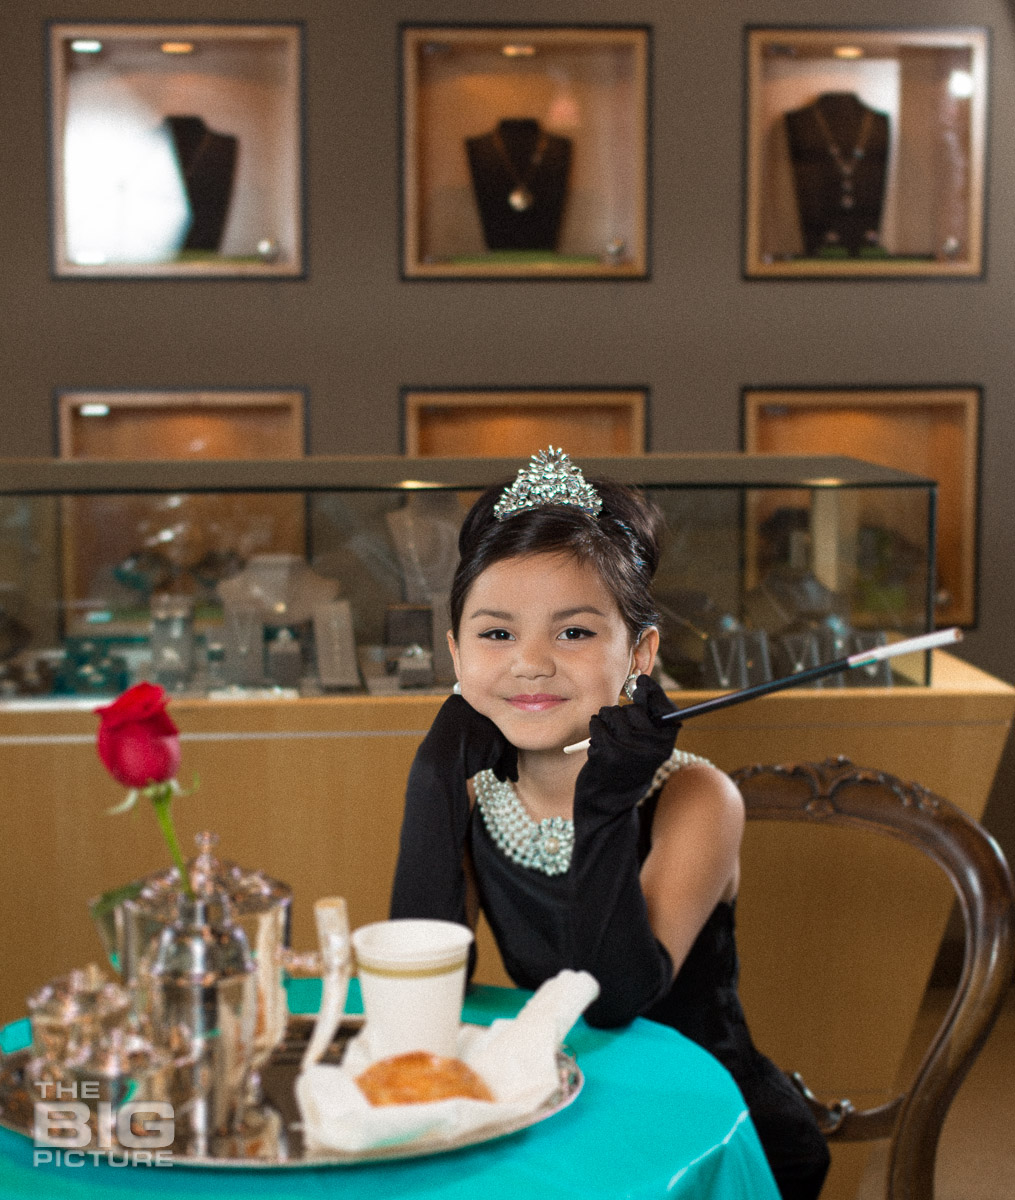 Children's Photography - Kids Photography - Ava sitting at the table in a jewellery shop